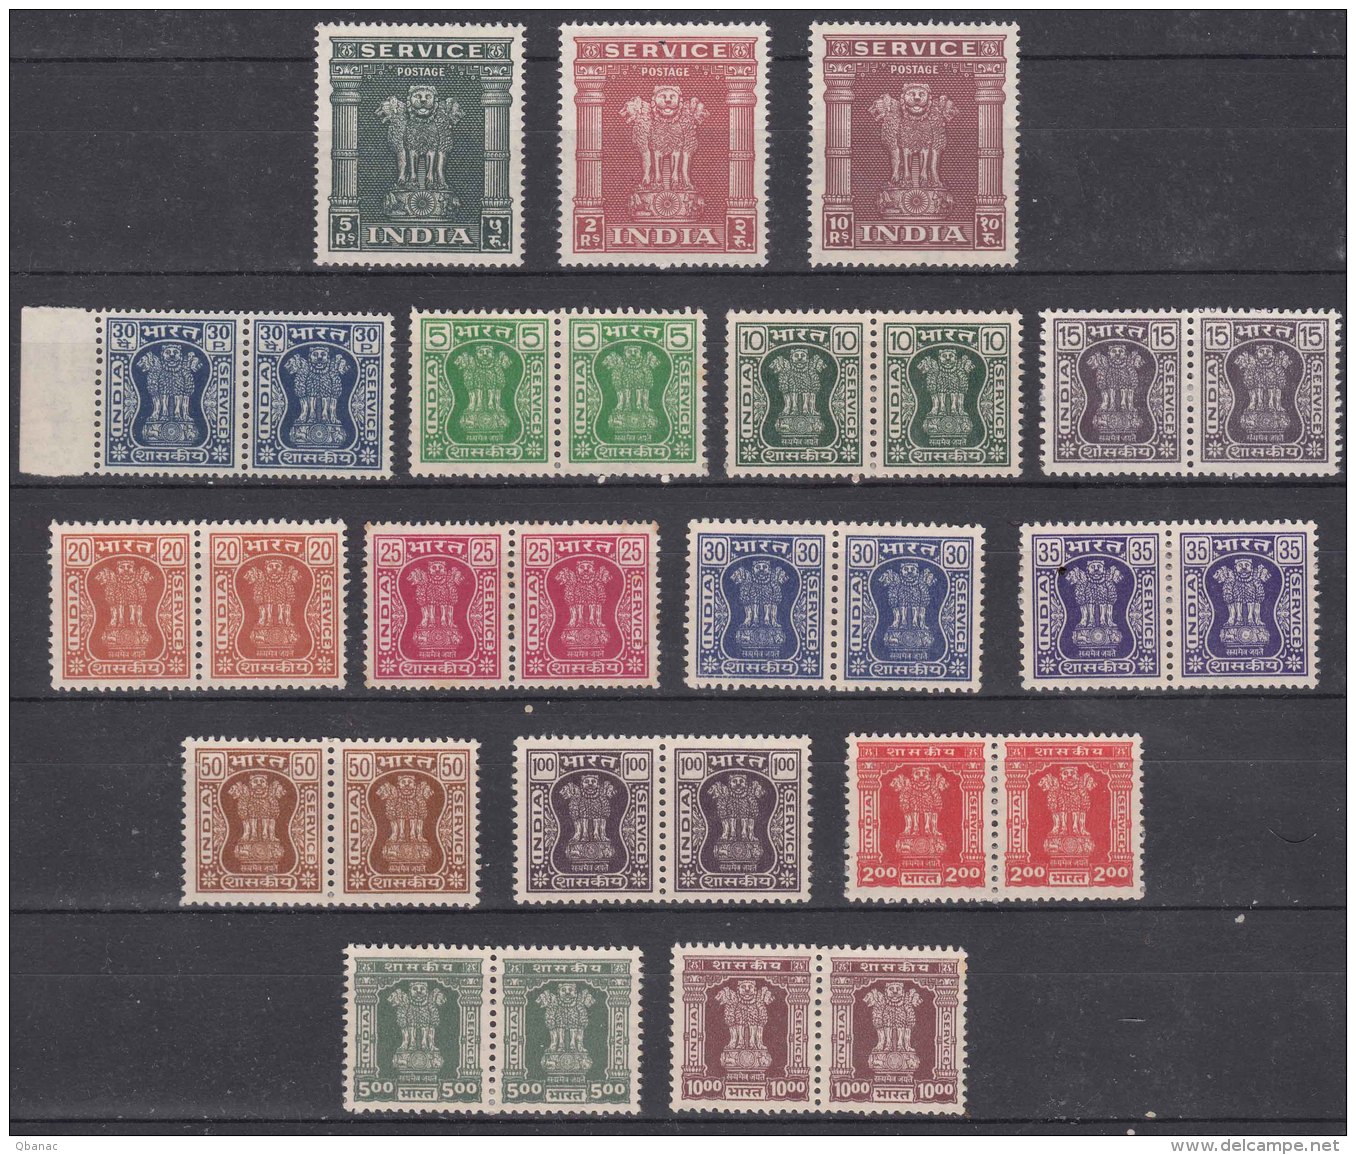 India Porto Postage Due, Dienstmarken Lot, Mixed Mint Never Hinged With Gum Or Without Gum - Francobolli Di Servizio